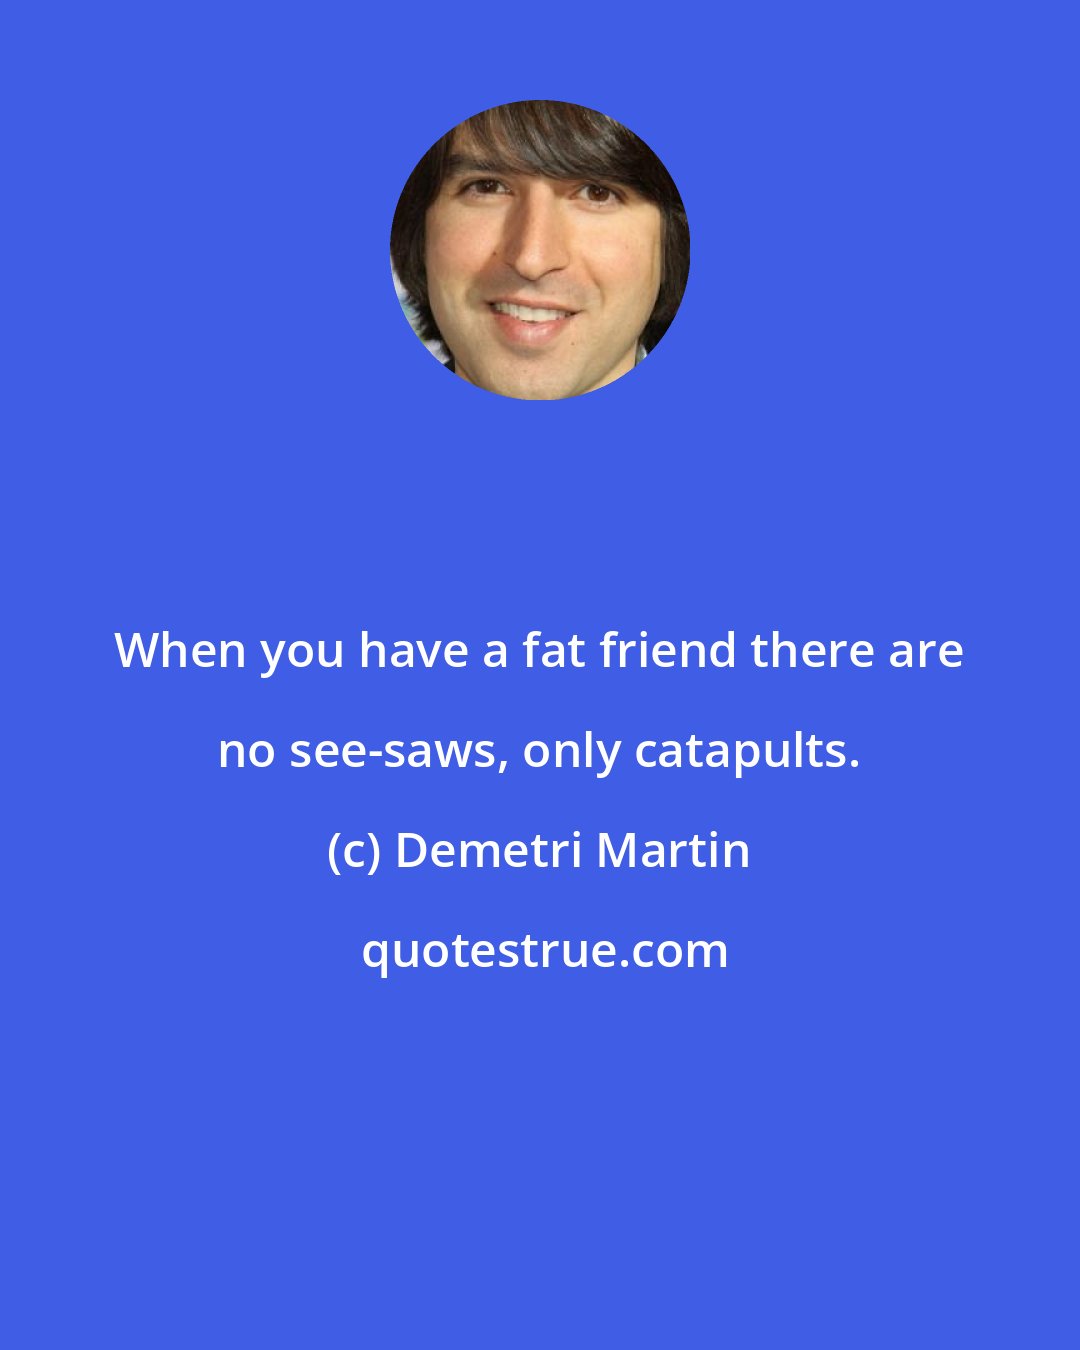 Demetri Martin: When you have a fat friend there are no see-saws, only catapults.